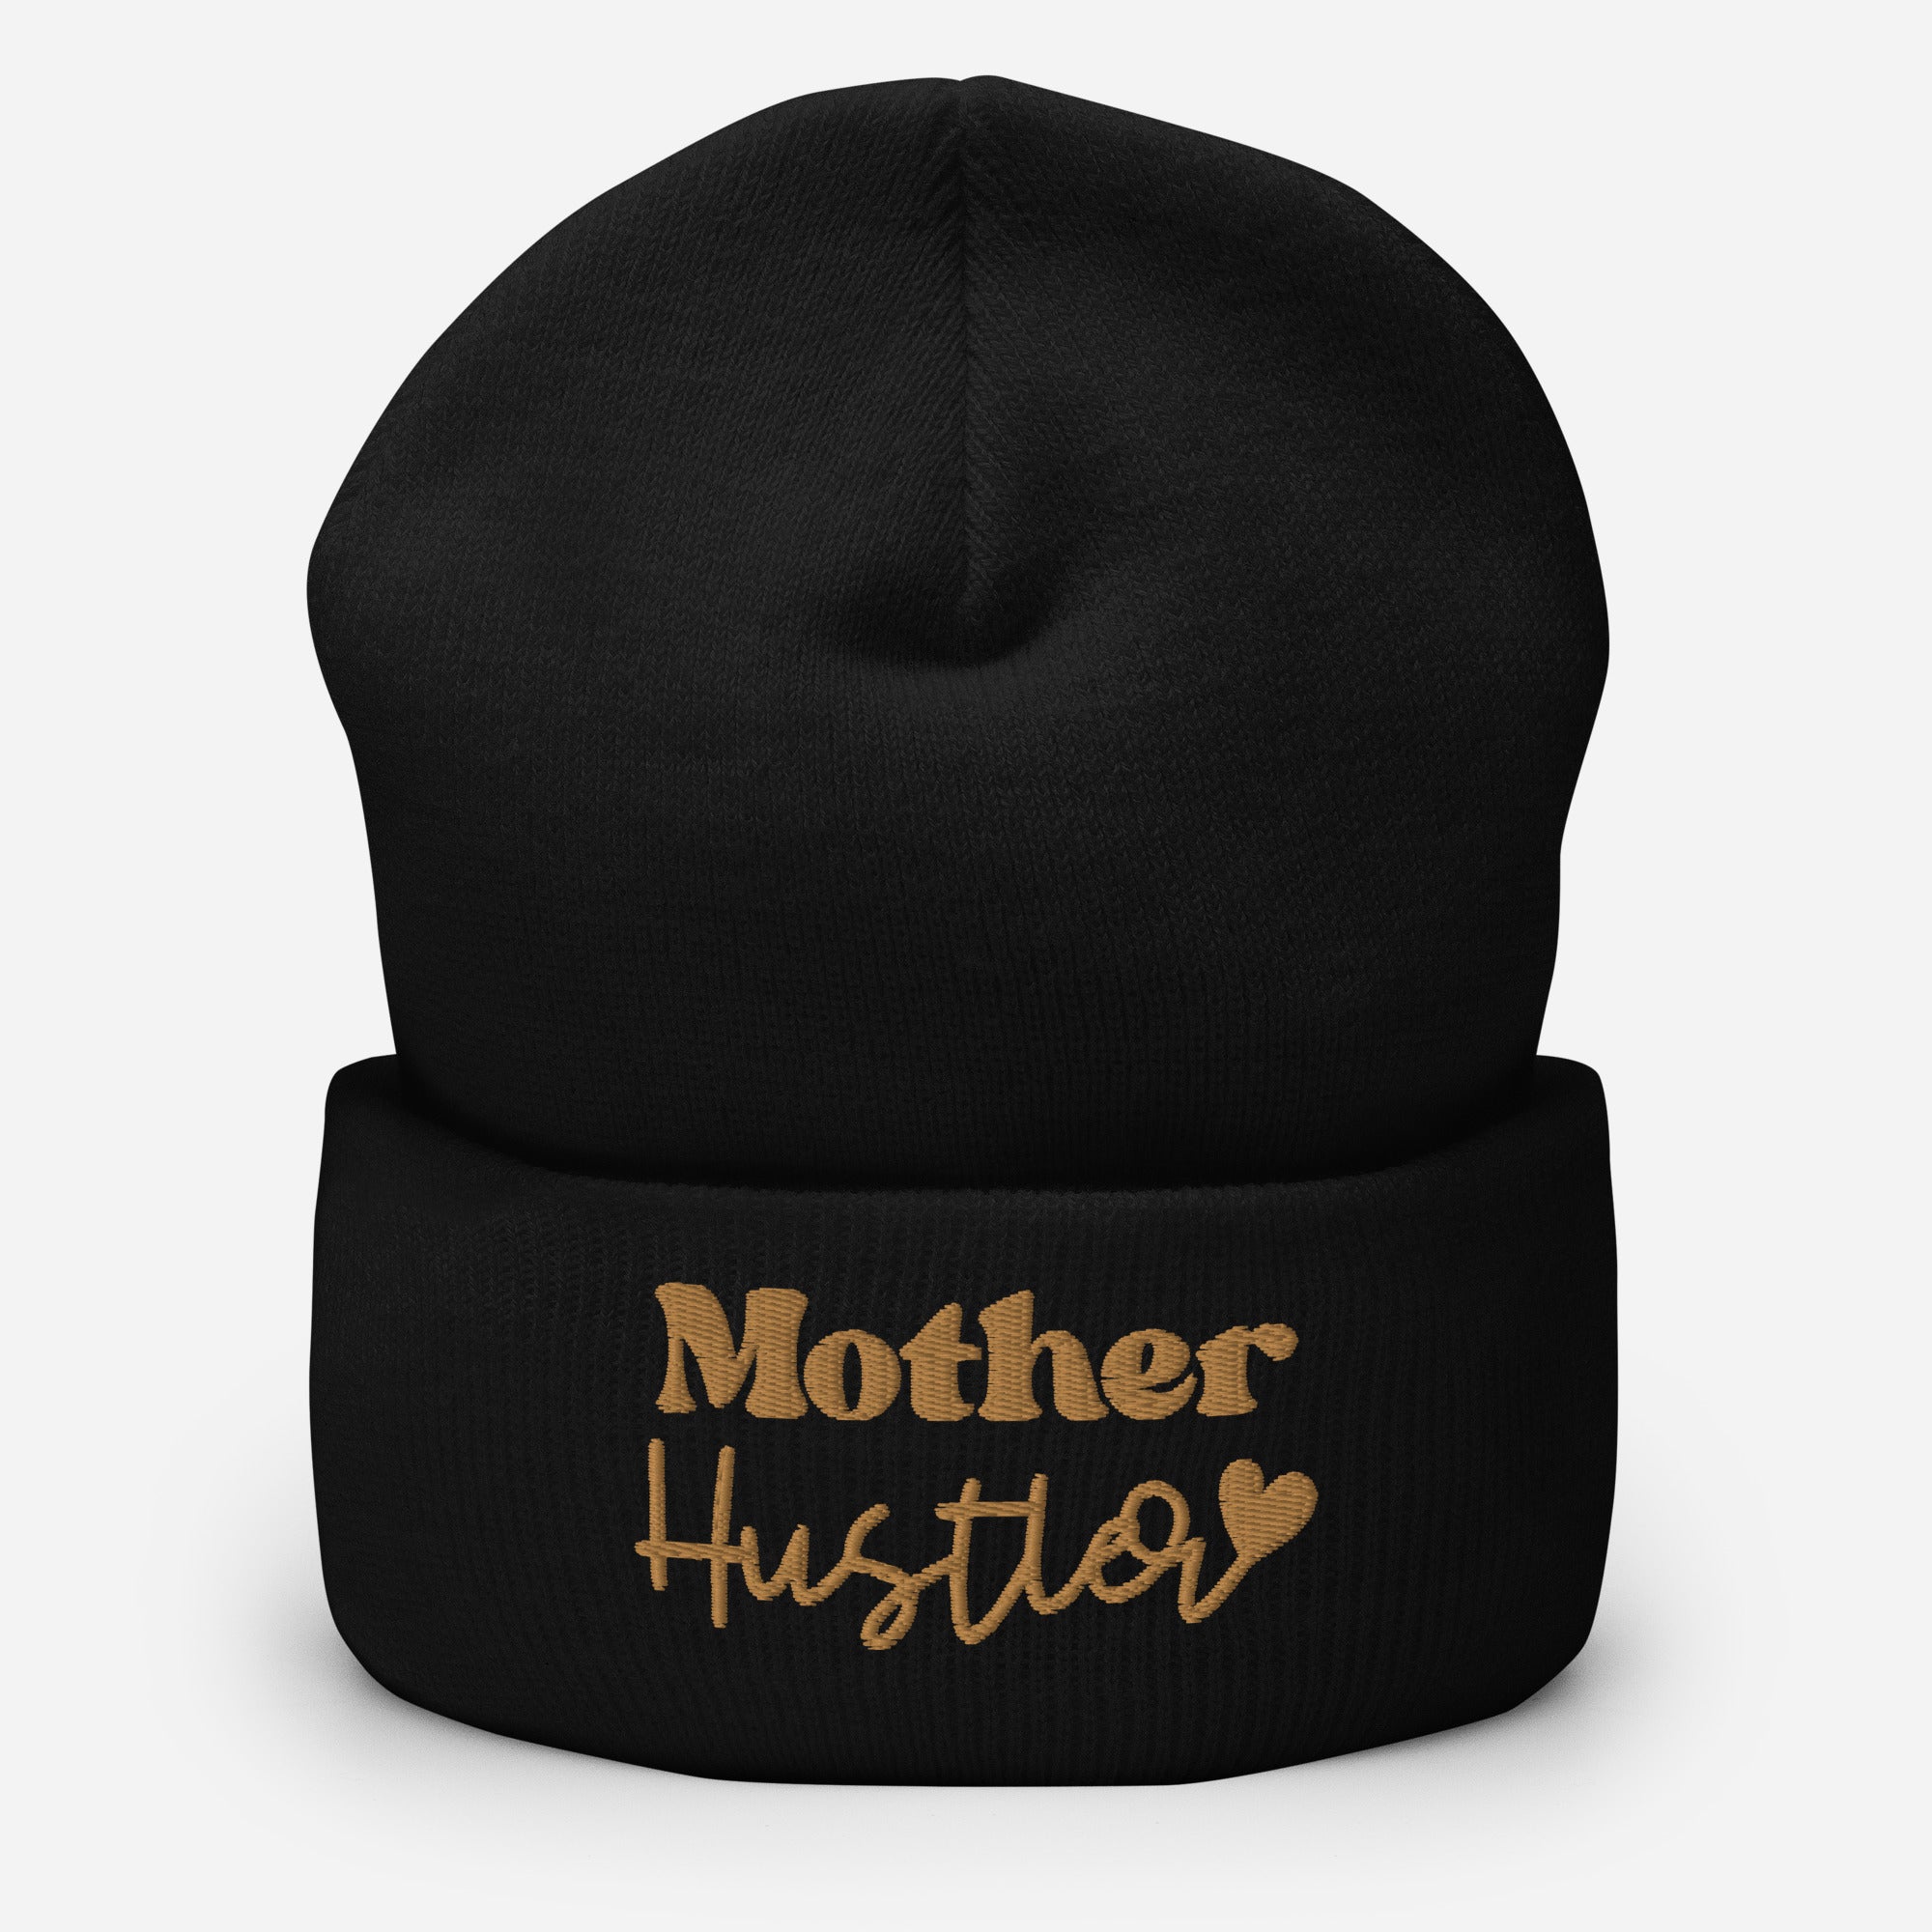 Mother Hustler embroidered cuffed beanie